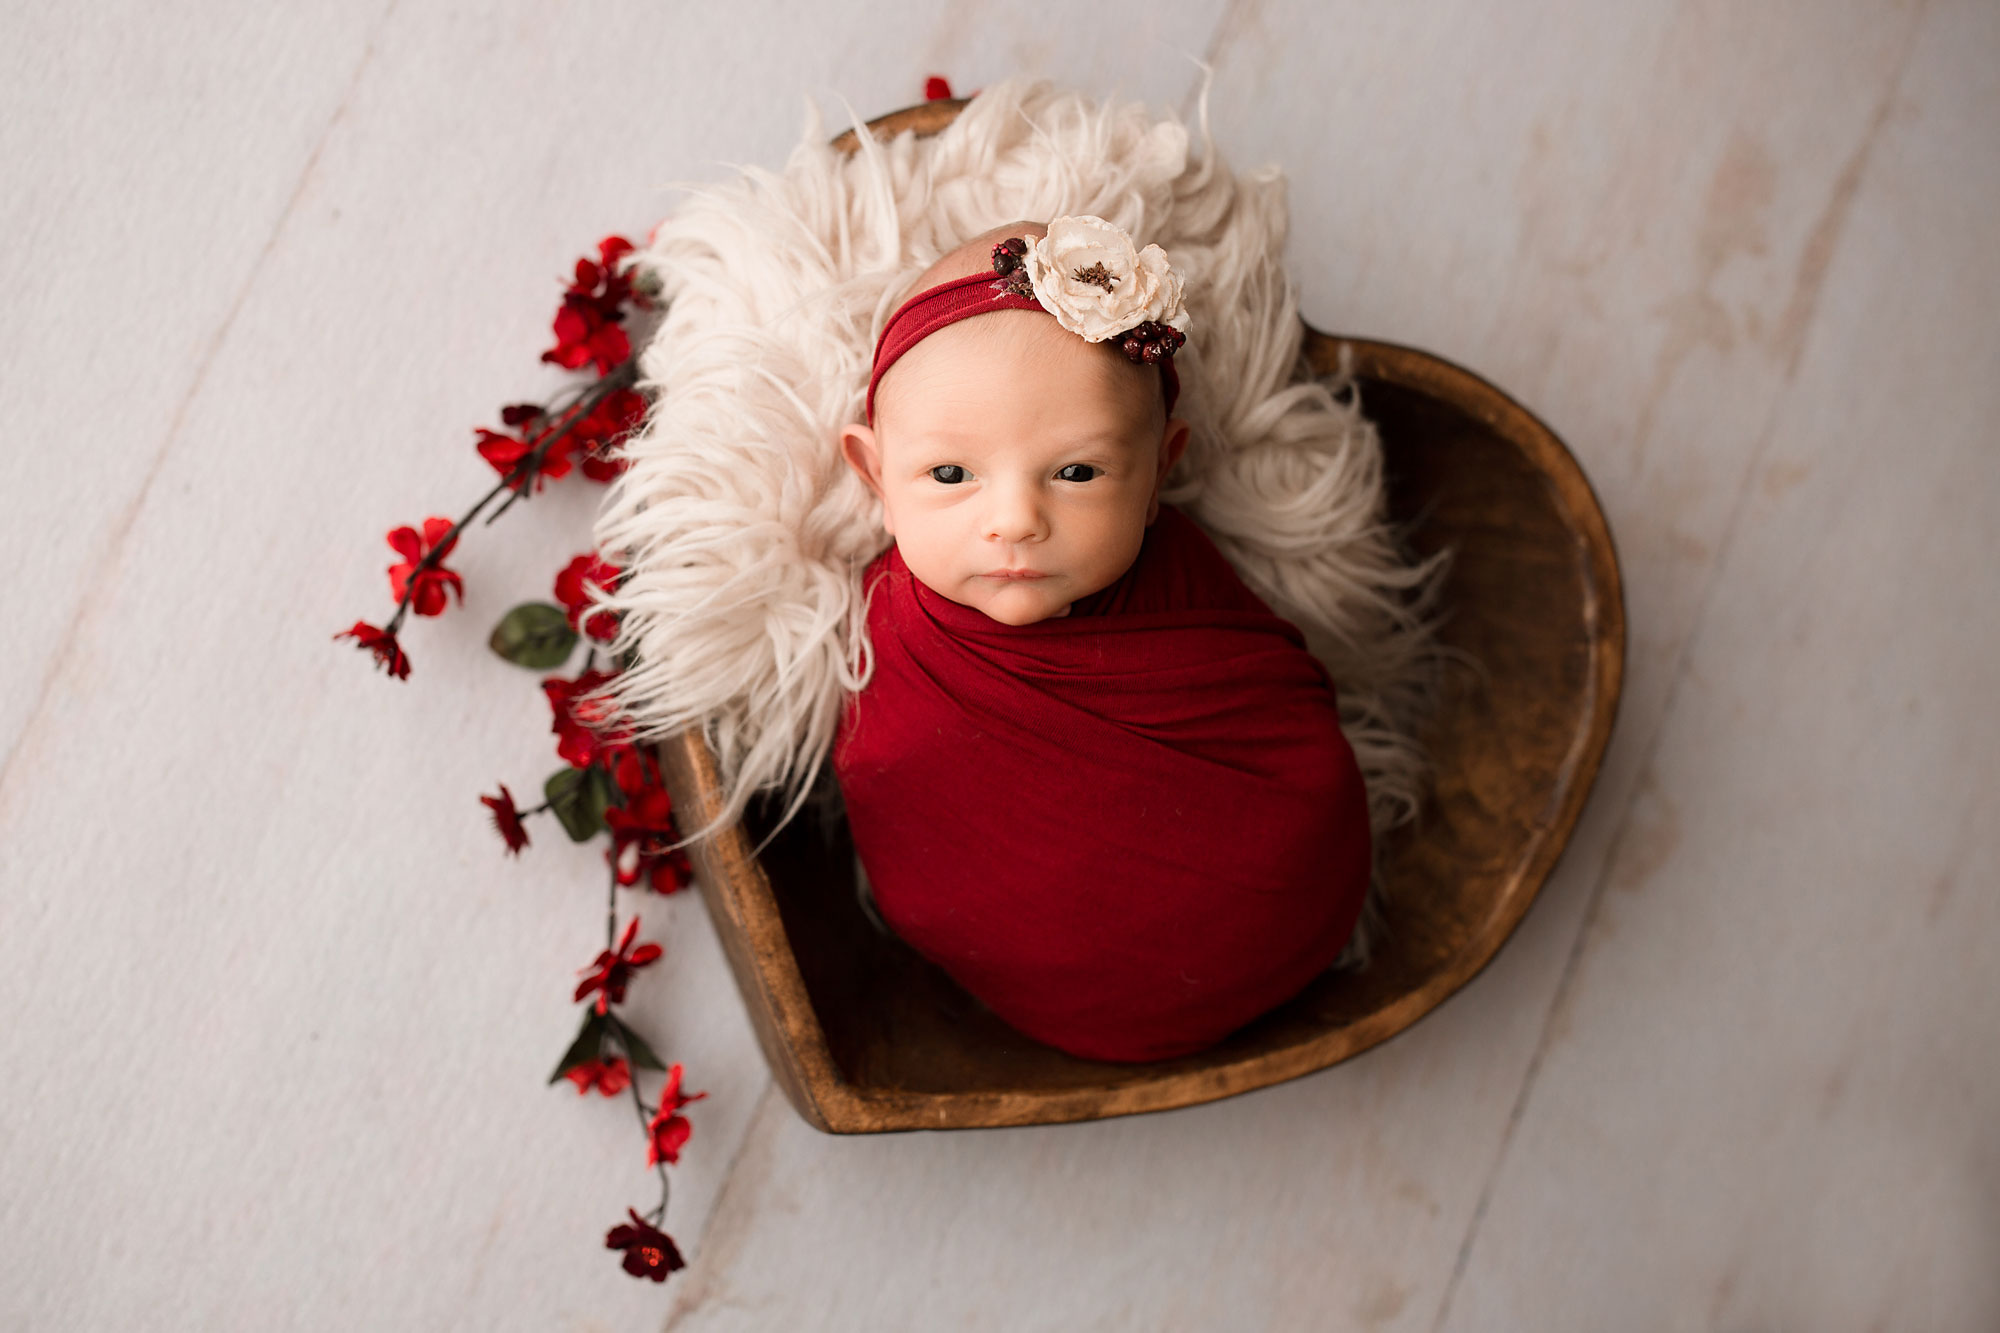 professional nj newborn photographer, wakeful baby girl in wooden heart bowl with red wrap and flowers